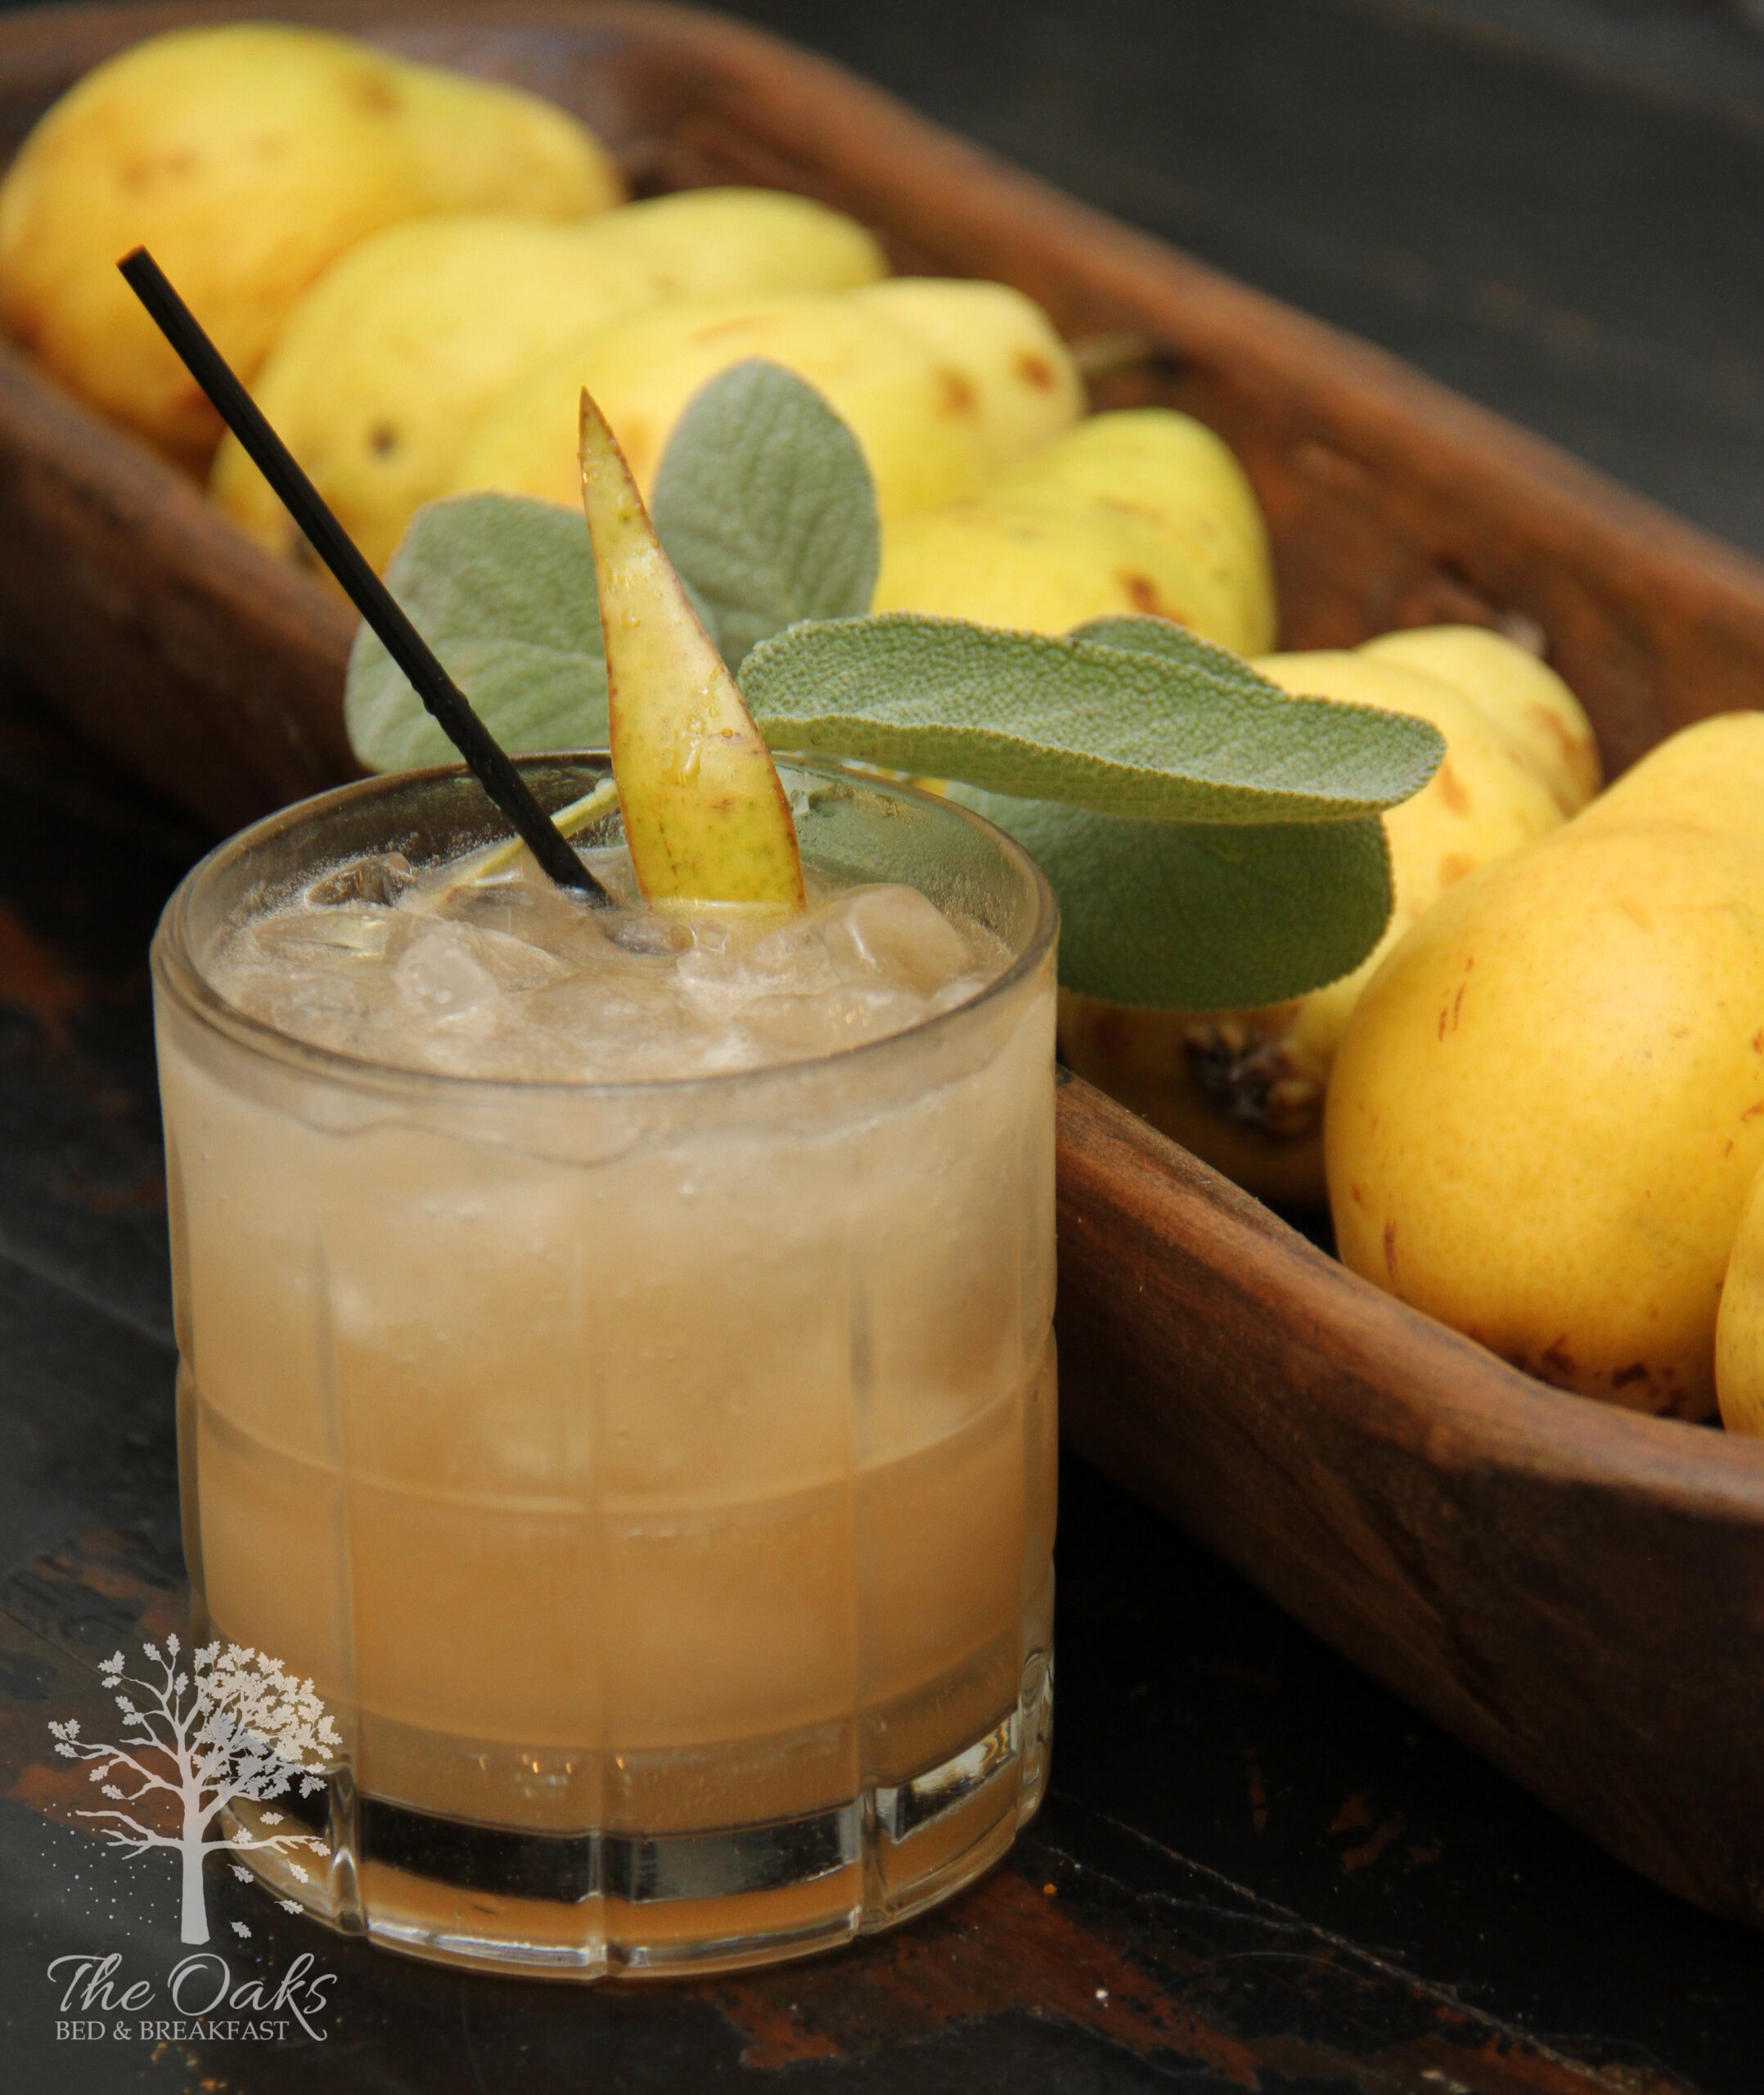 Life’s Flavors: Sparkling Sage Pear Cocktail By Allison Libby-Thesing Of The Oak’s Bed & Breakfast